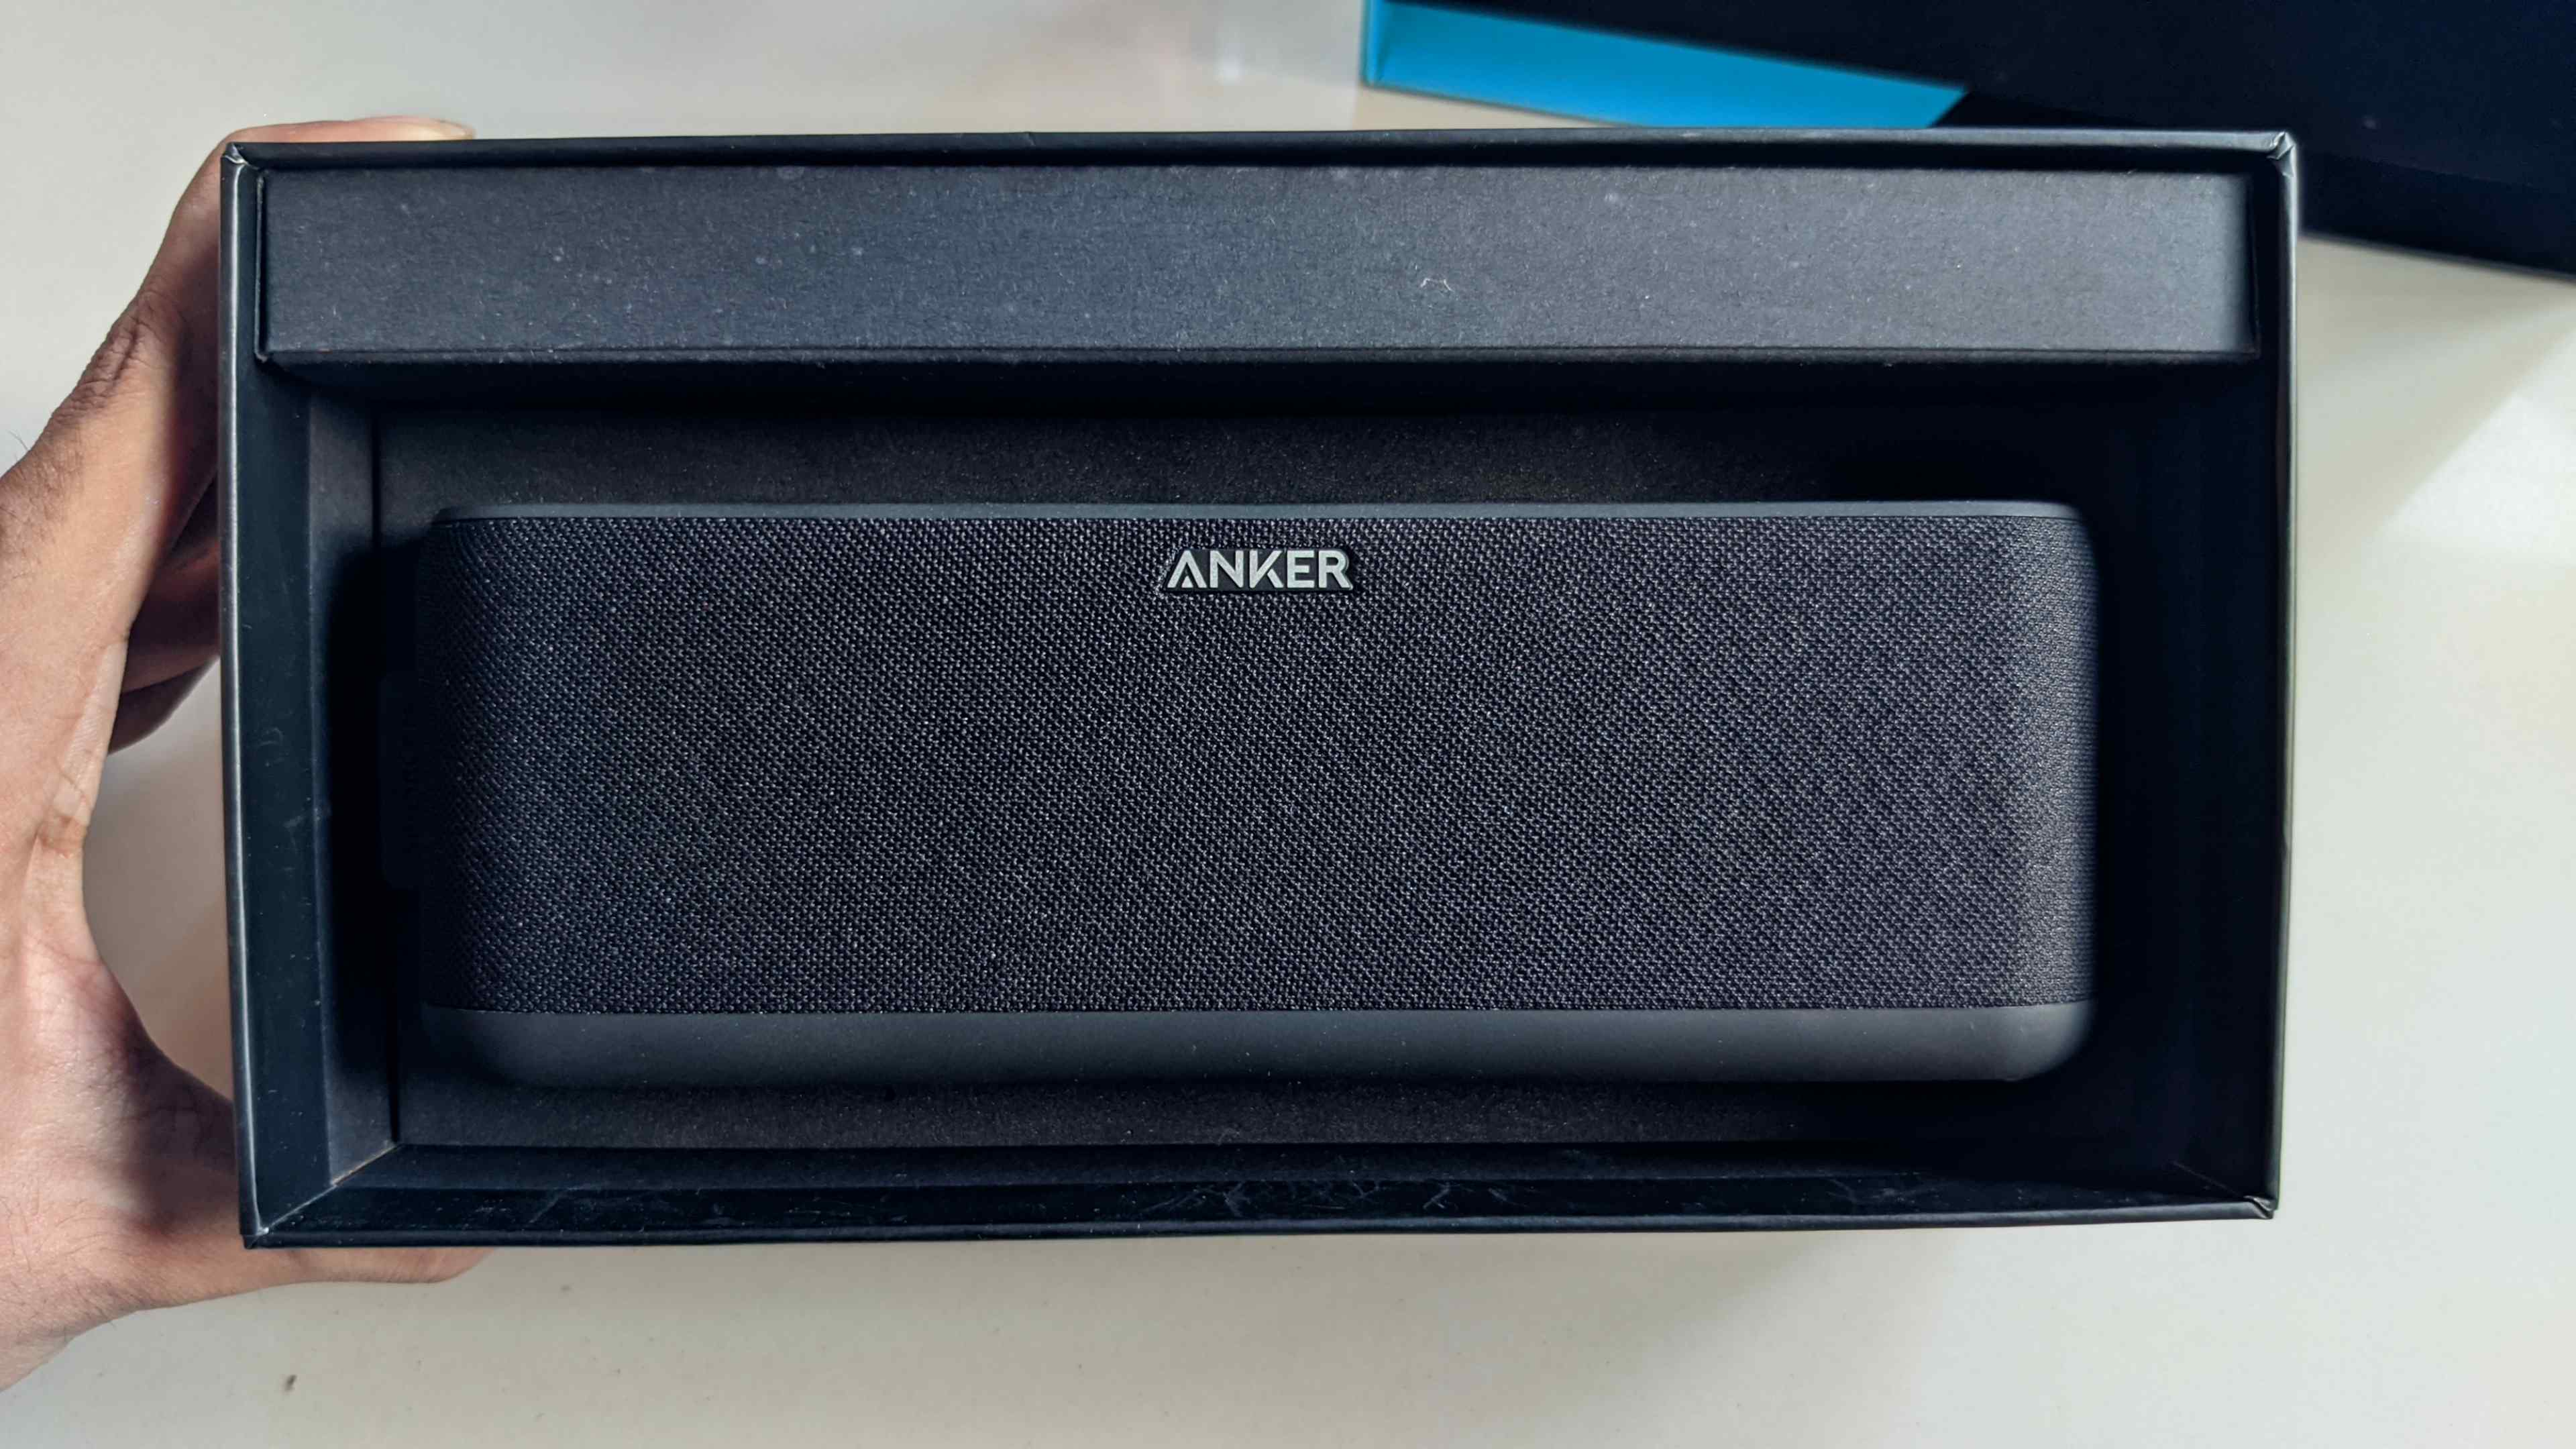 picture of anker soundcore boost speaker inside its cool packaging box